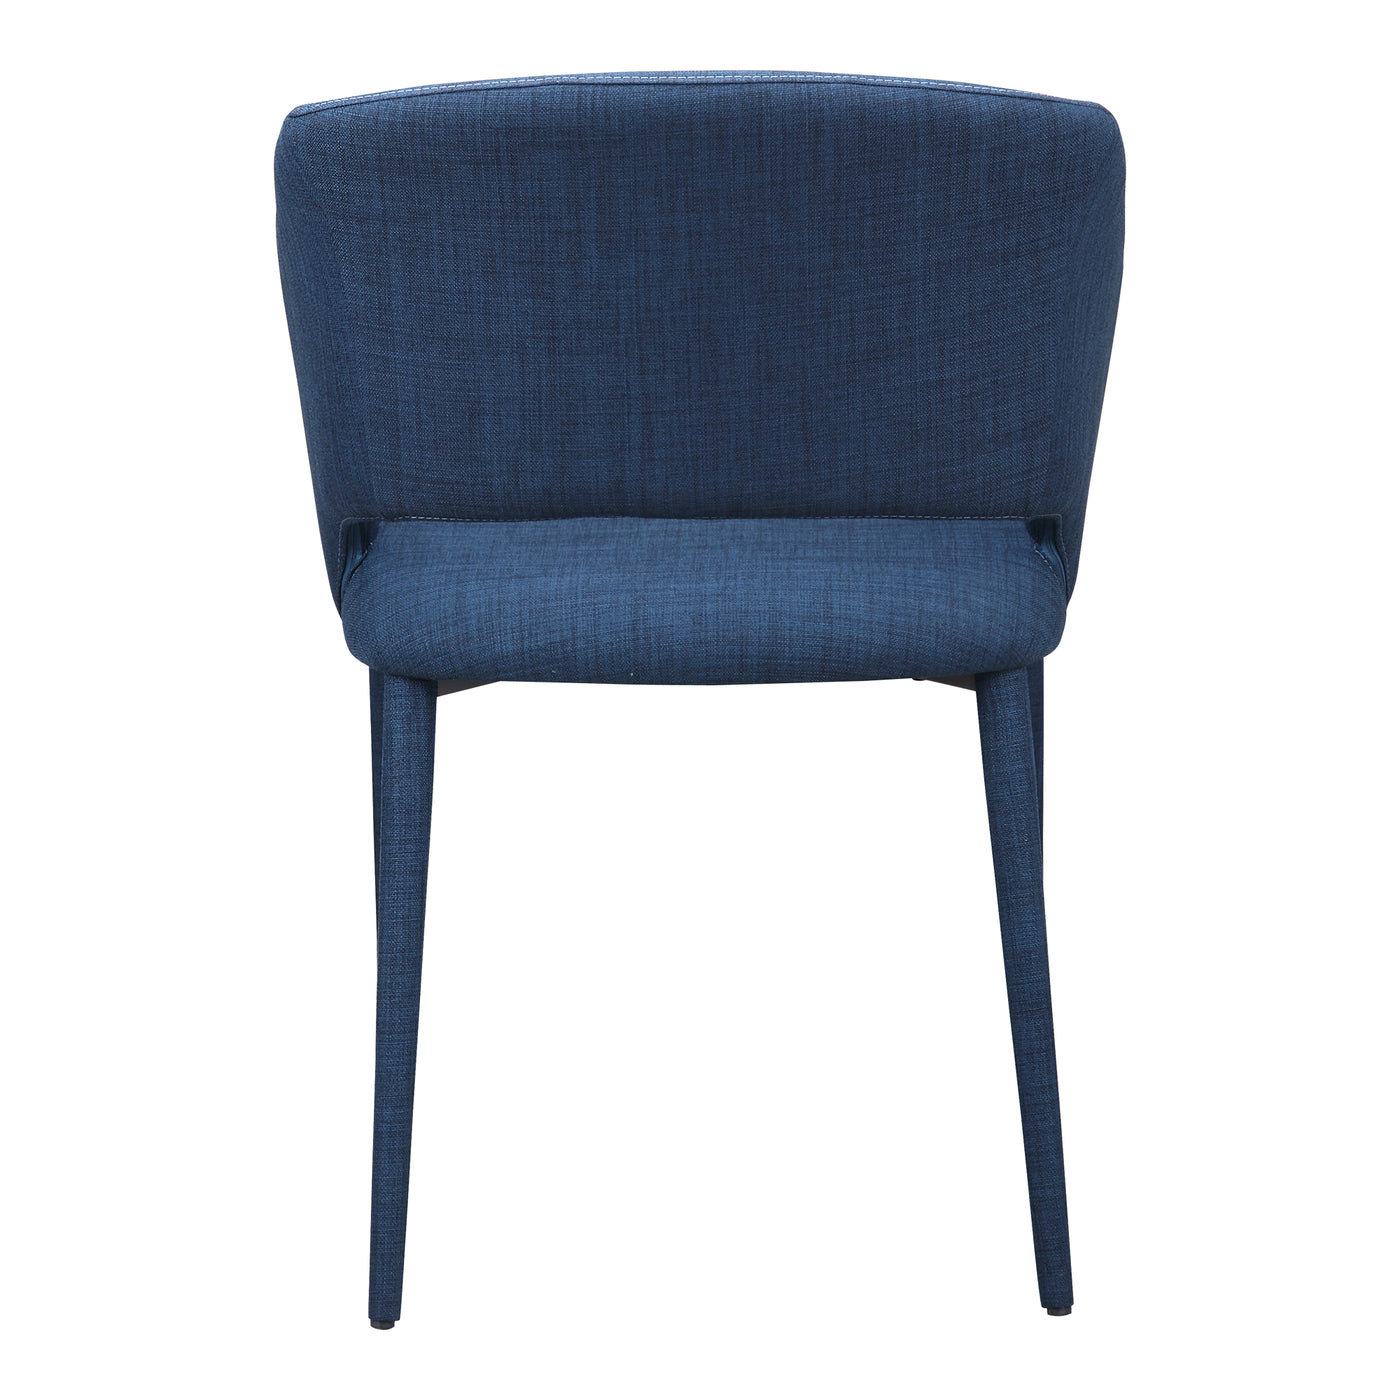 The William dining chair is sure to please any dining arrangement. Dressed head to toe in a trendy Royal Blue upholstery, ...